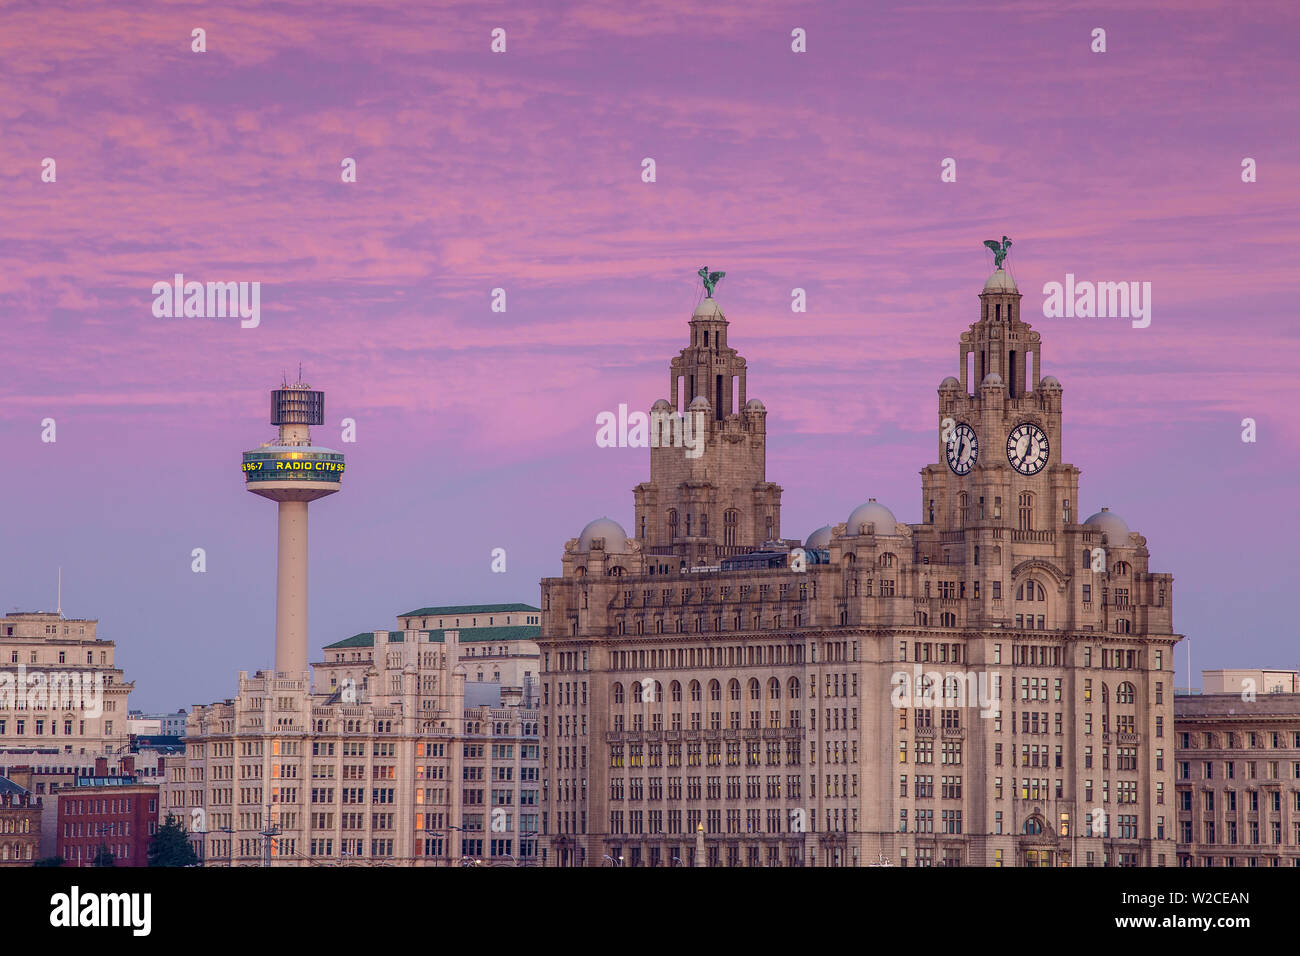 United Kingdom, England, Merseyside, Liverpool, View of The Royal Liver Building - with two clock towers topped by two Liver Birds, with Radio City Tower behind Stock Photo